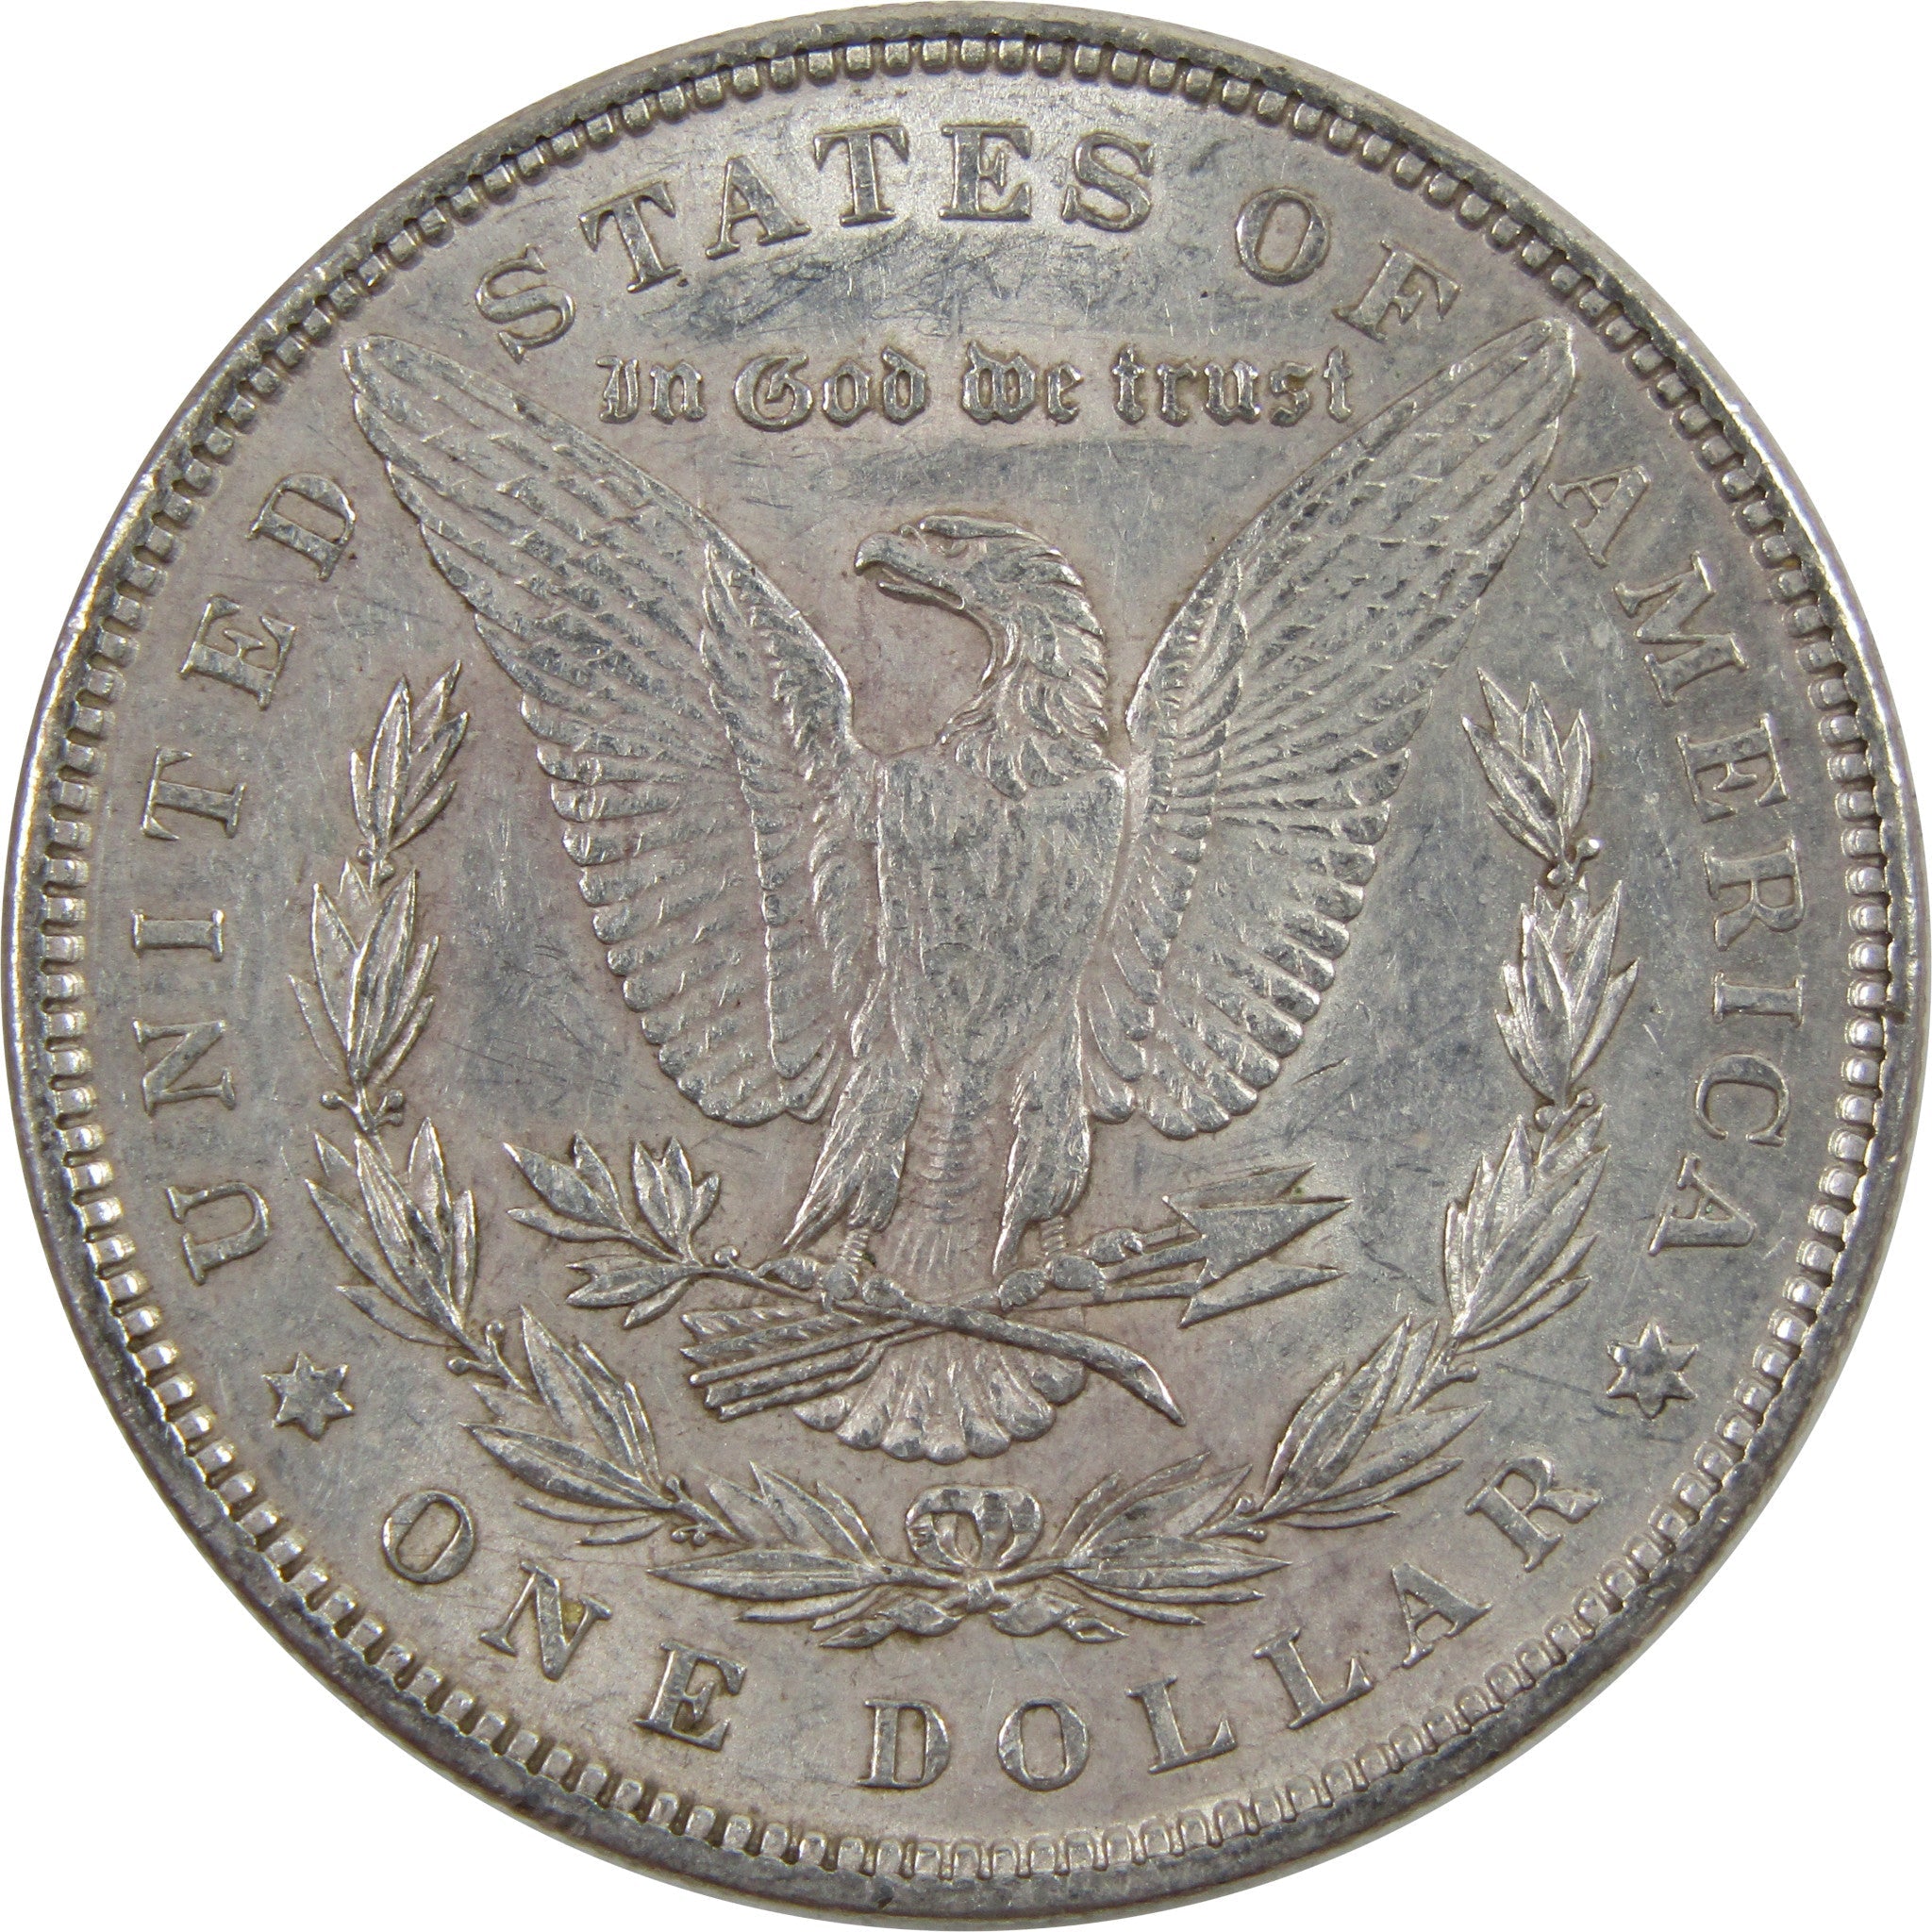 1896 Morgan Dollar AU About Uncirculated 90% Silver $1 Coin SKU:I5486 - Morgan coin - Morgan silver dollar - Morgan silver dollar for sale - Profile Coins &amp; Collectibles